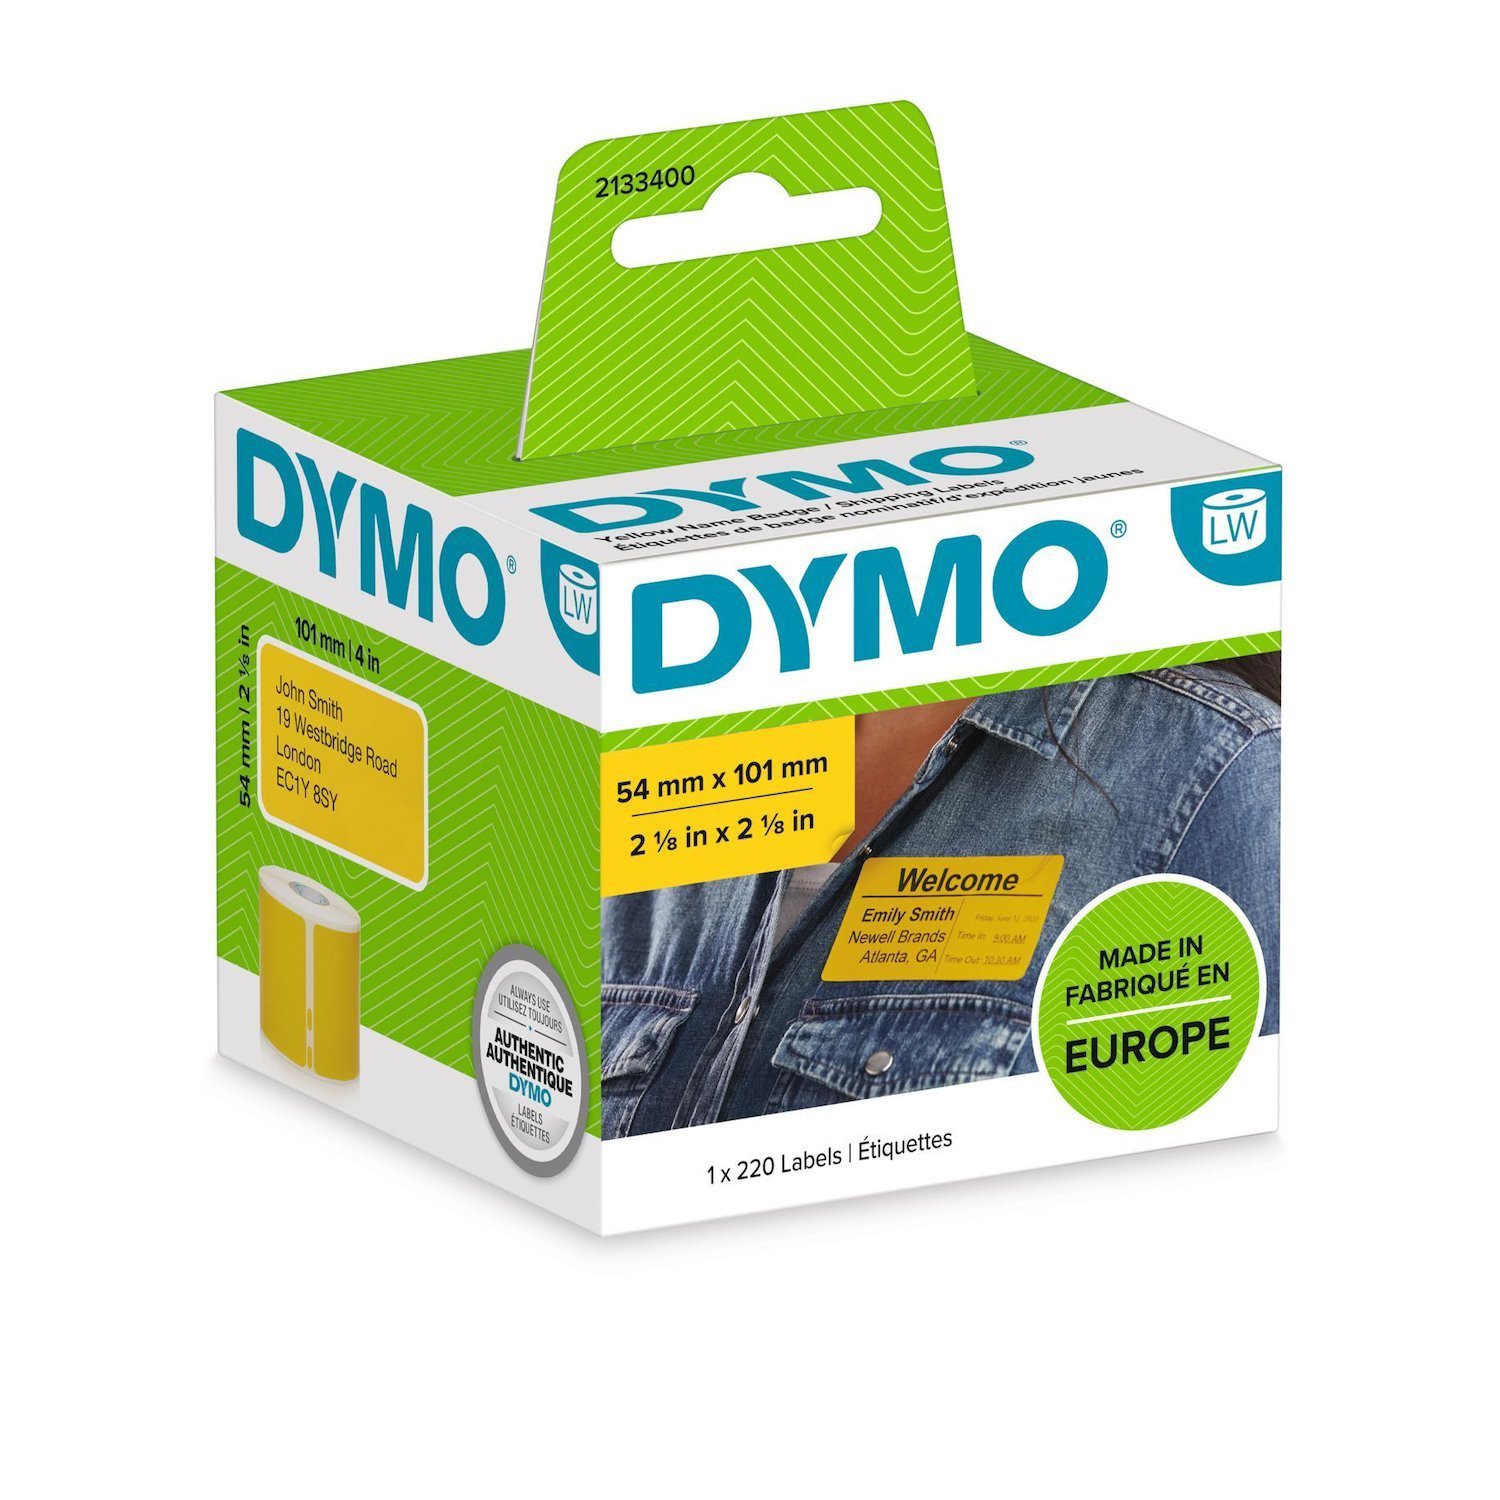 Dymo LW Coloured Shipping/Name Badge Label - 54X101 - 1 Roll Á 220 Labels - 2133400 (Dymo 2133400 54MM X 101MM Shipping And Name Badge Black On Yellow)